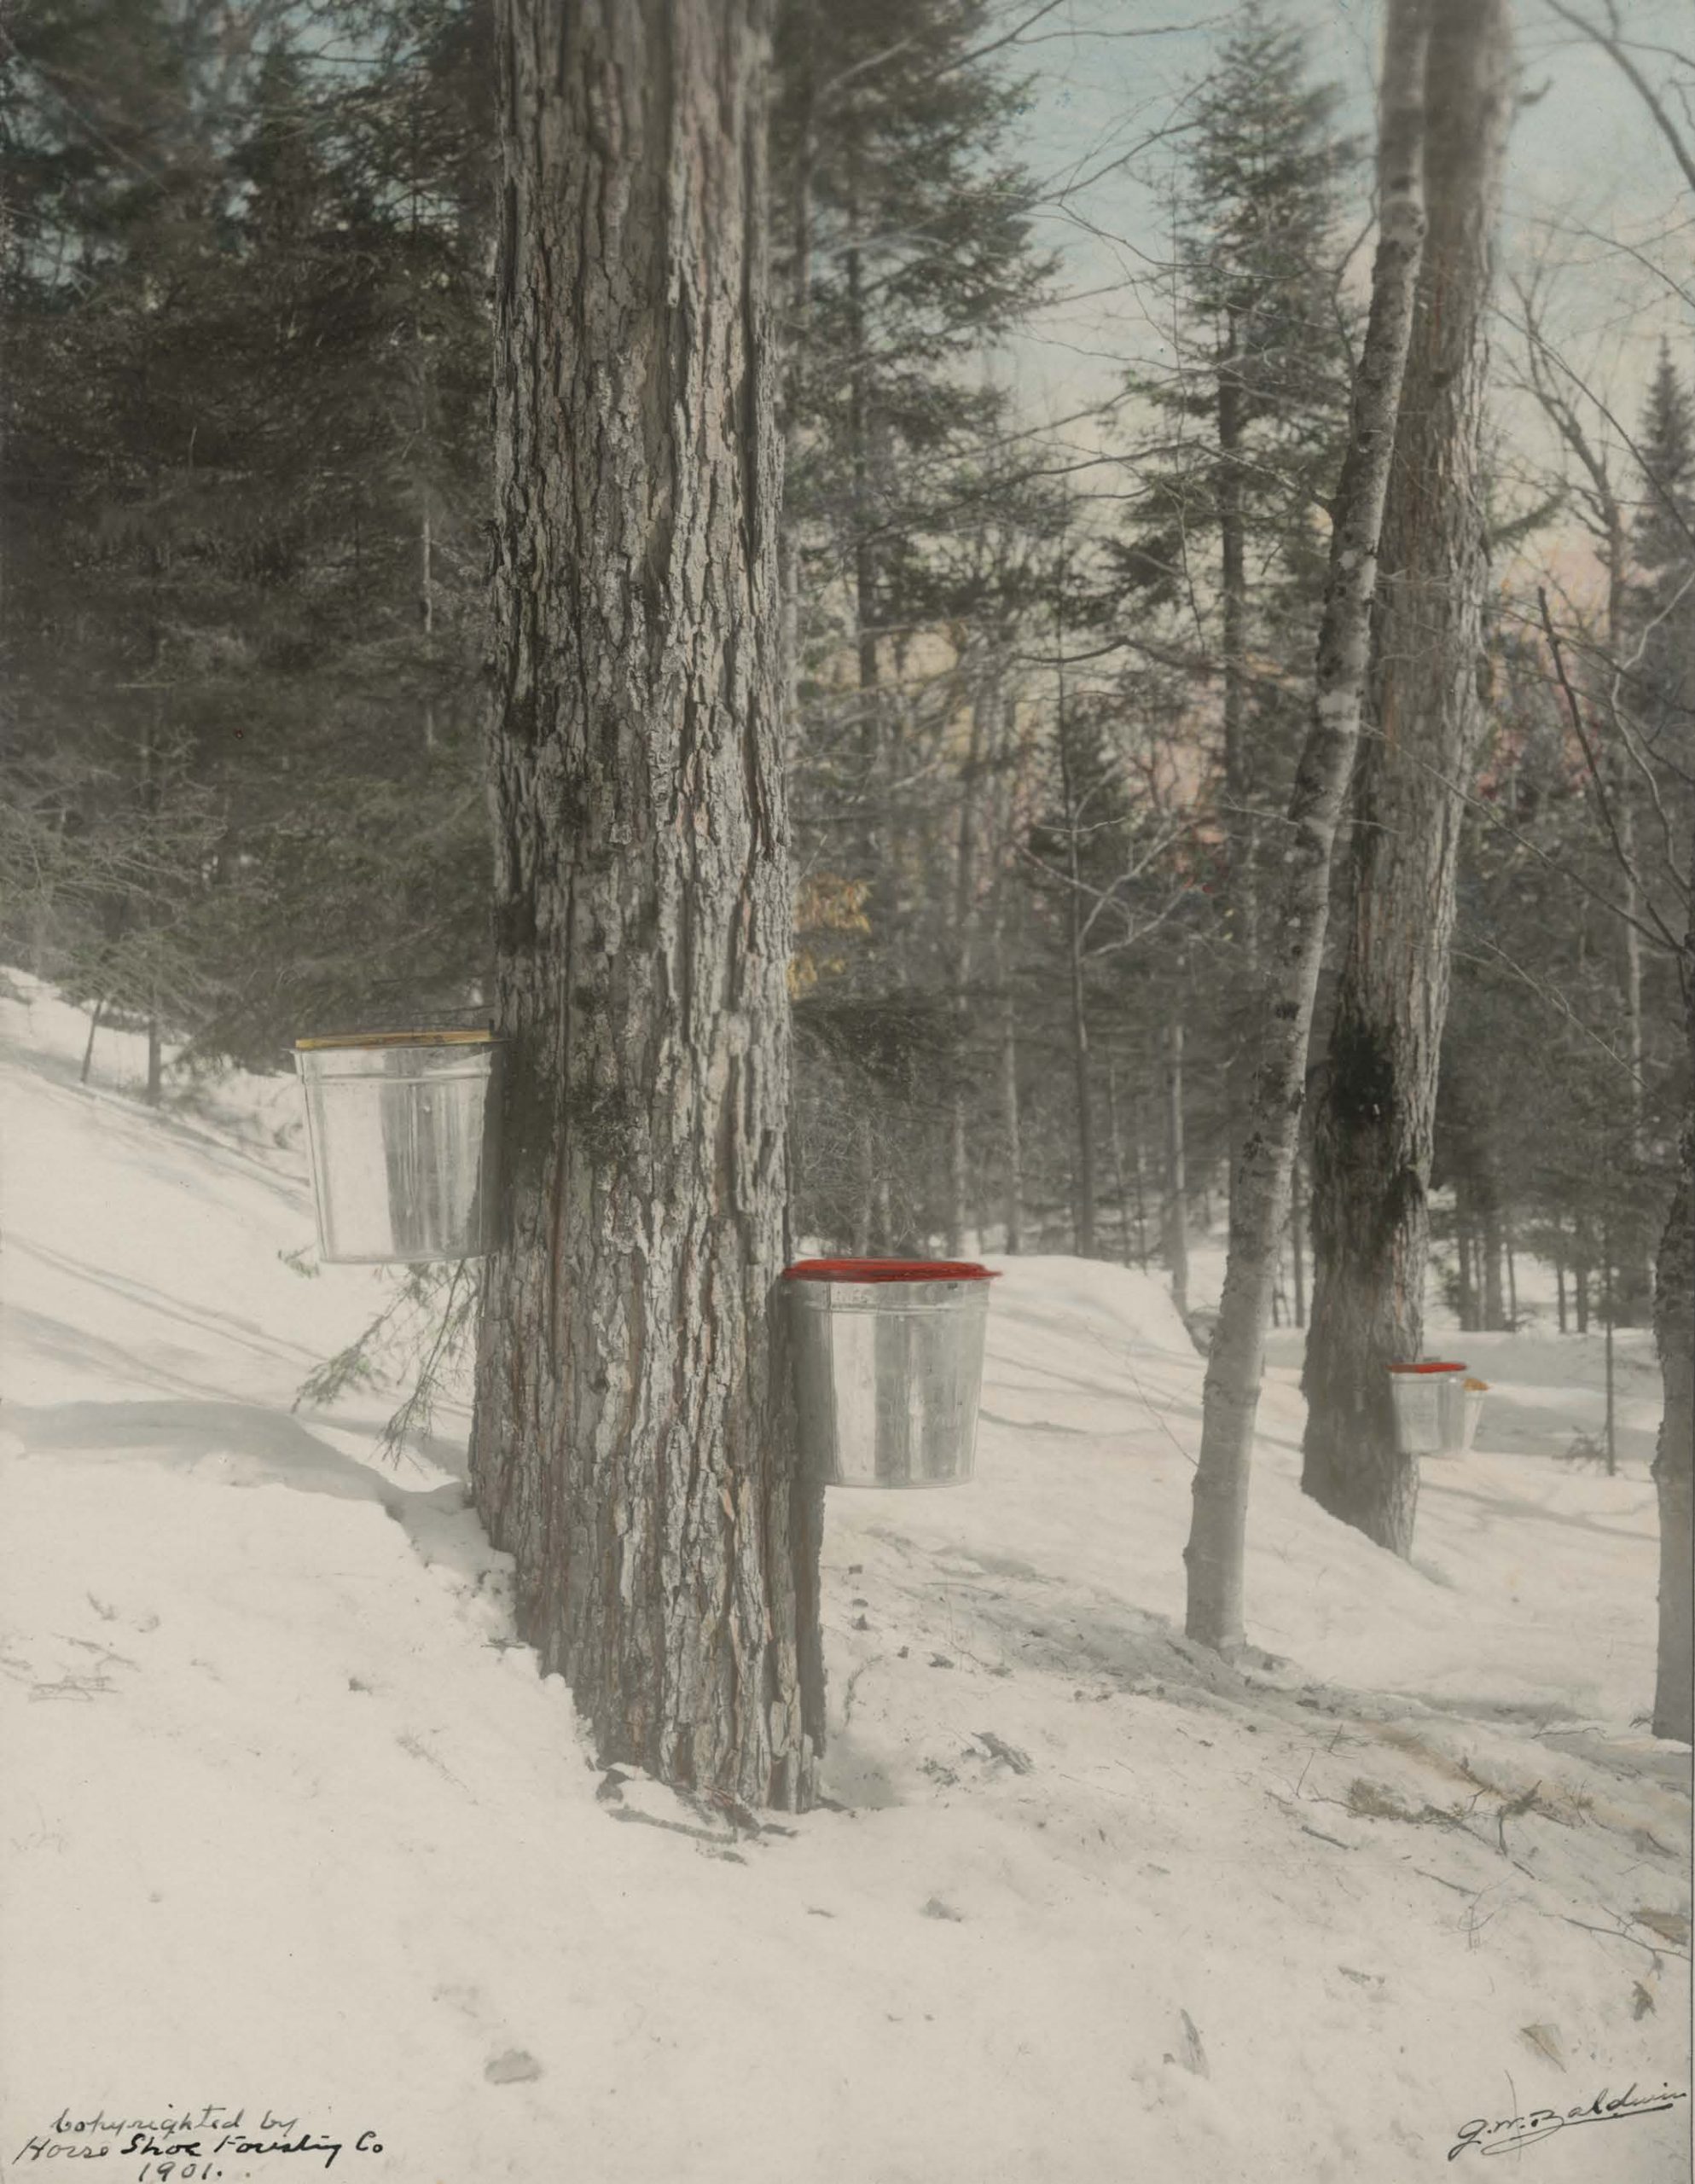 1901 photograph of sap collection buckets attached to maple trees